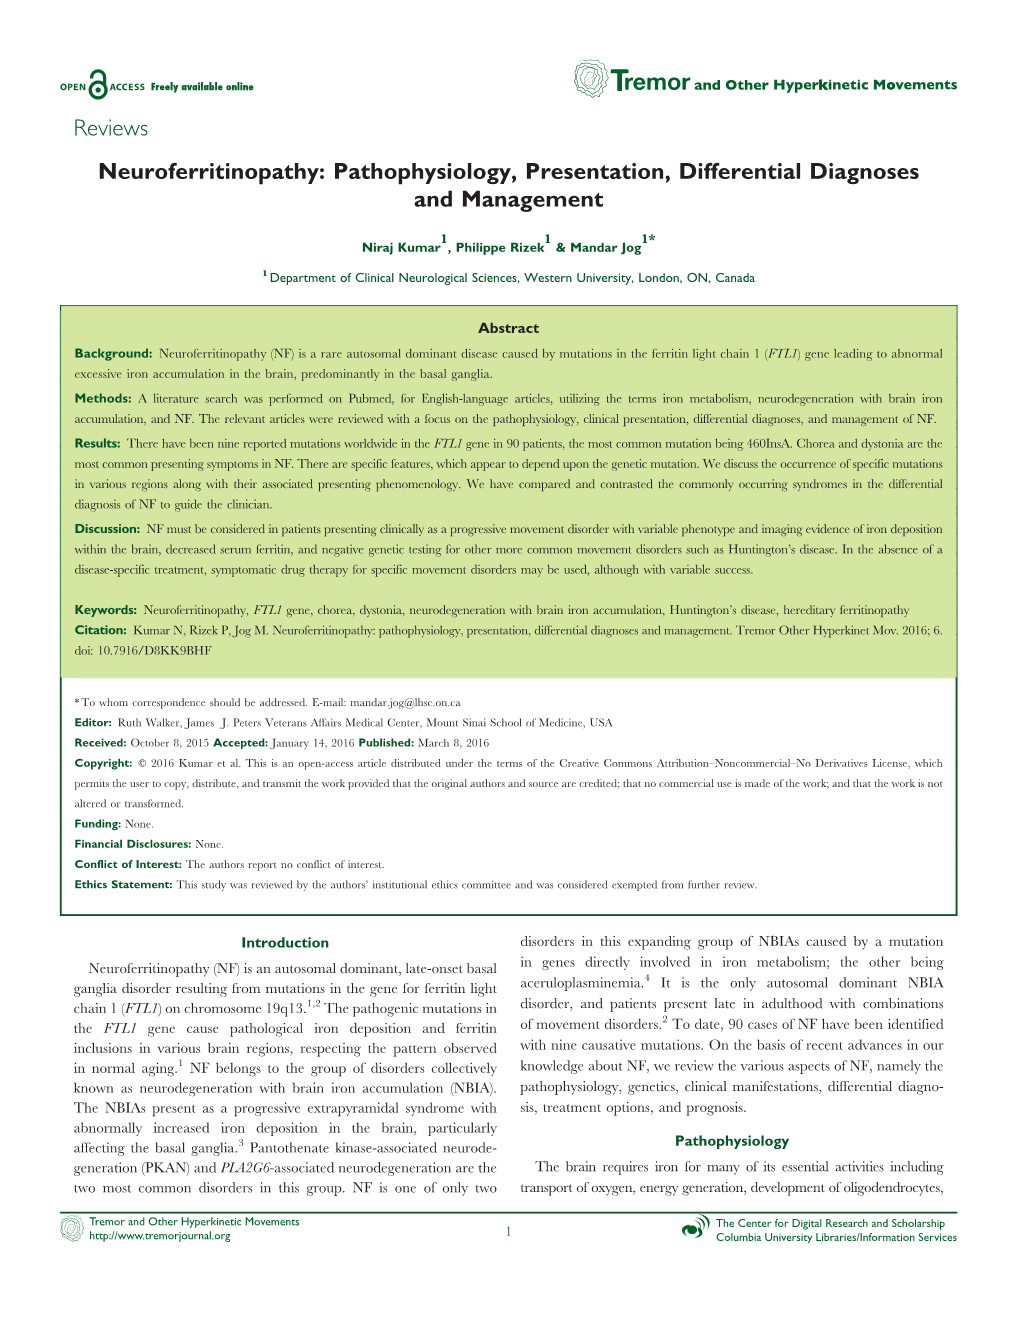 Neuroferritinopathy: Pathophysiology, Presentation, Differential Diagnoses and Management